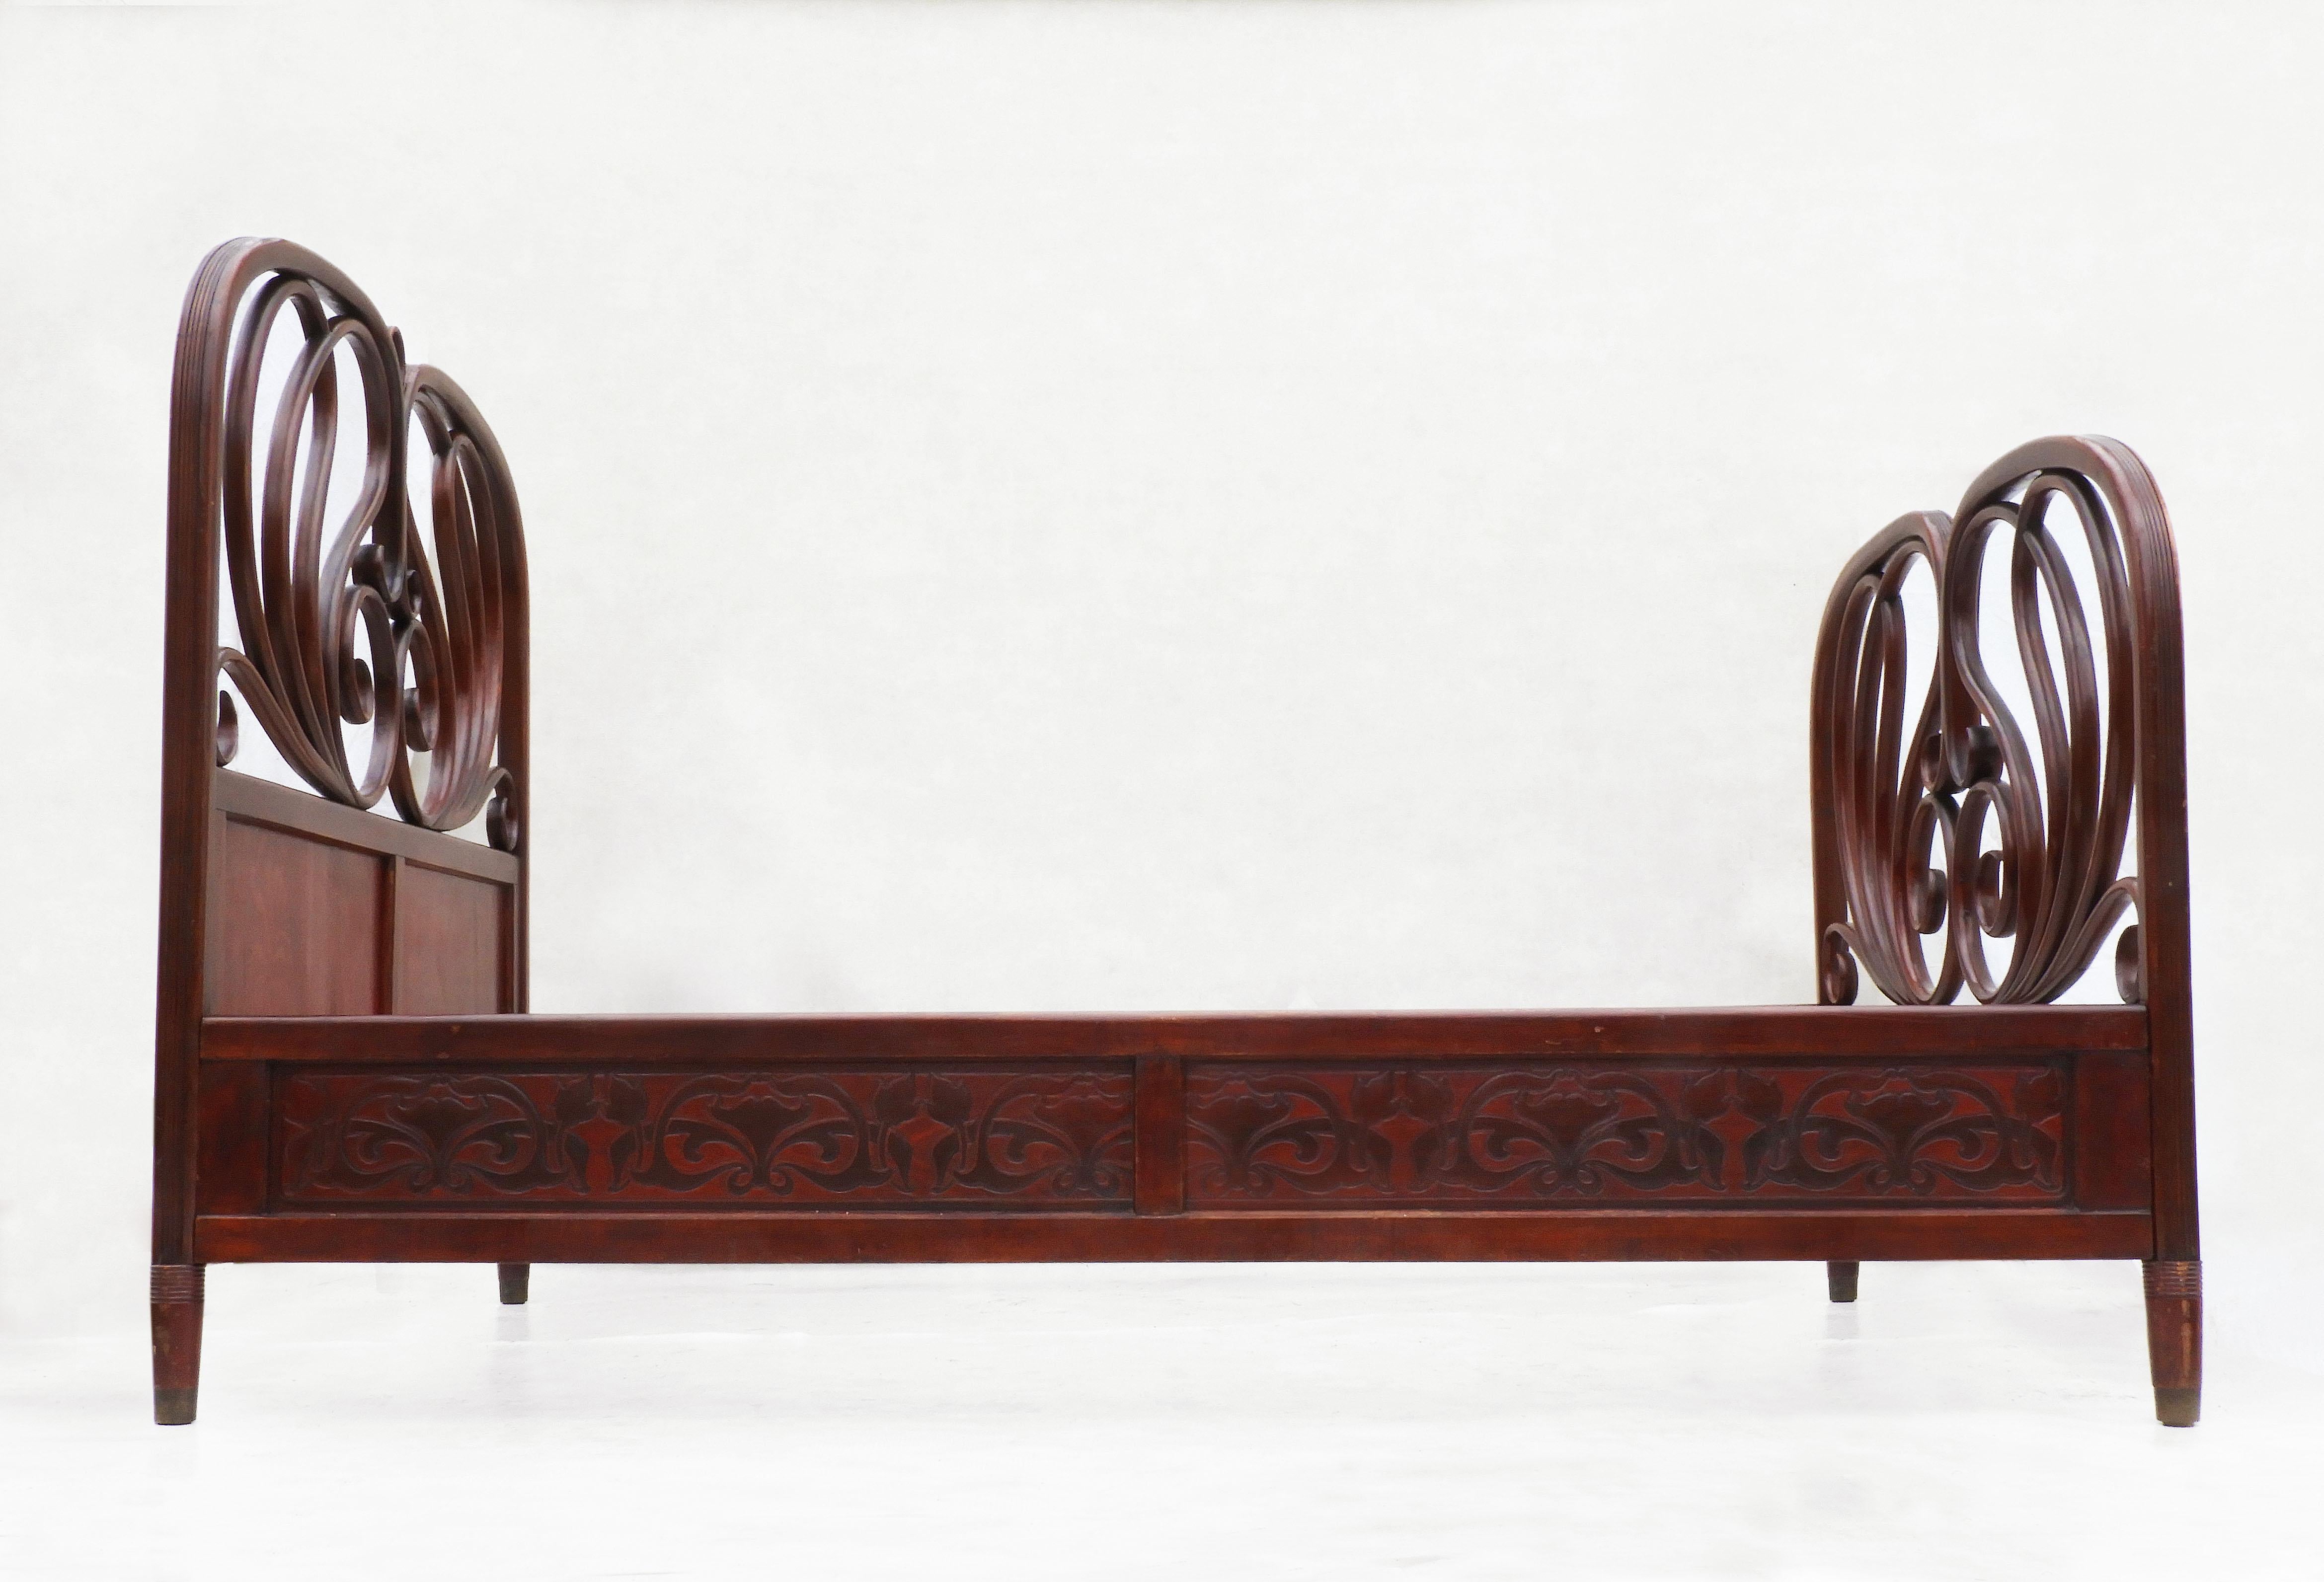 Austrian Bentwood Bed by Jacob & Josef Kohn C1900 In Good Condition For Sale In Trensacq, FR